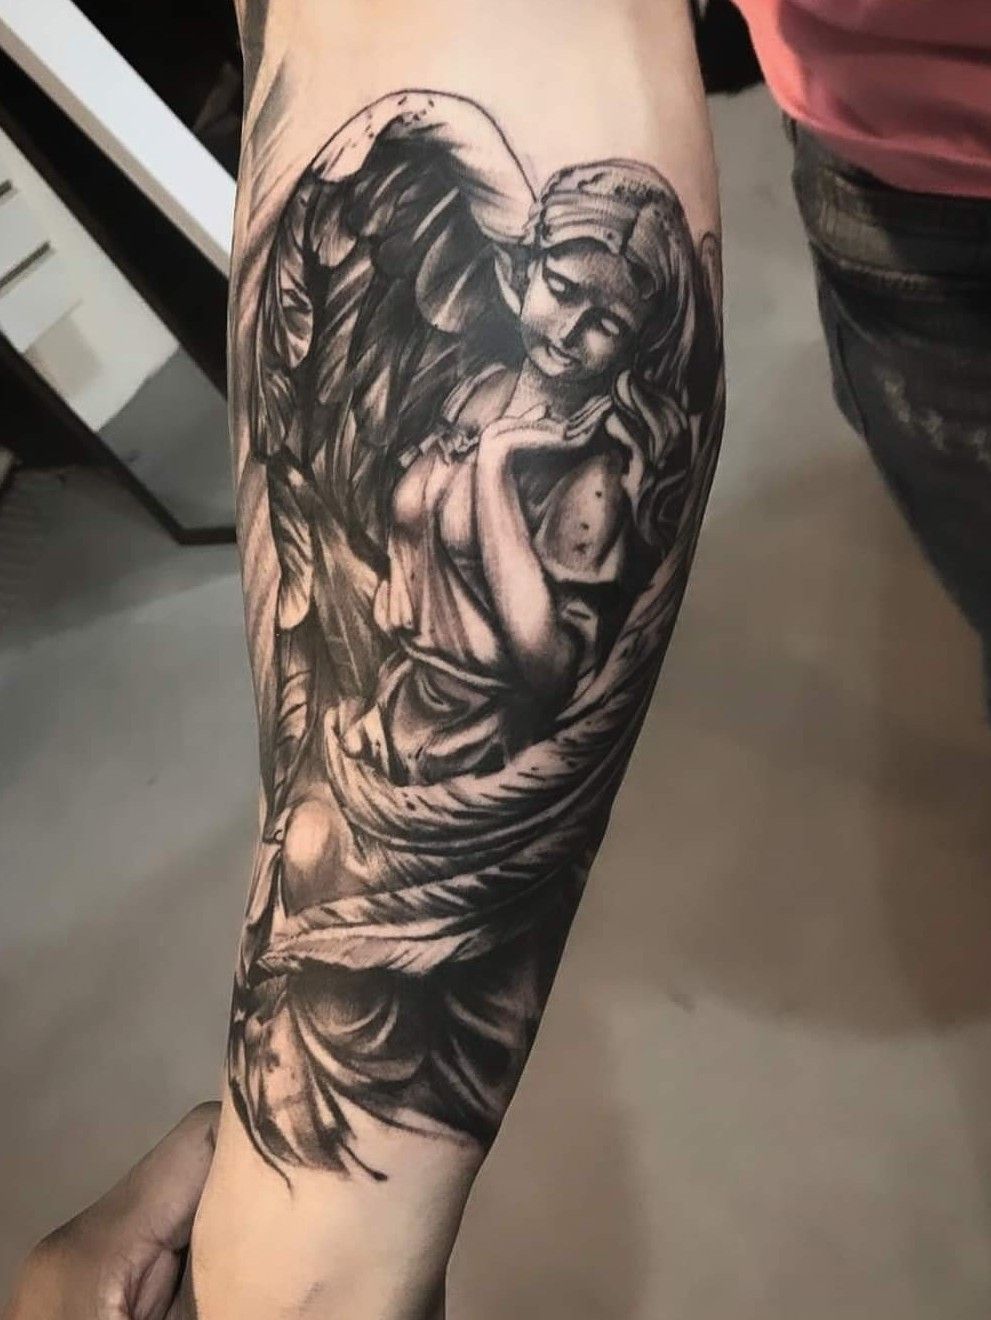 Nicholas Christian Tattoos - I love tattooing statues and eyes. I was  stoked on this tattoo. One session down and a good start on this sleeve💪 *  Now booking for April 2021.